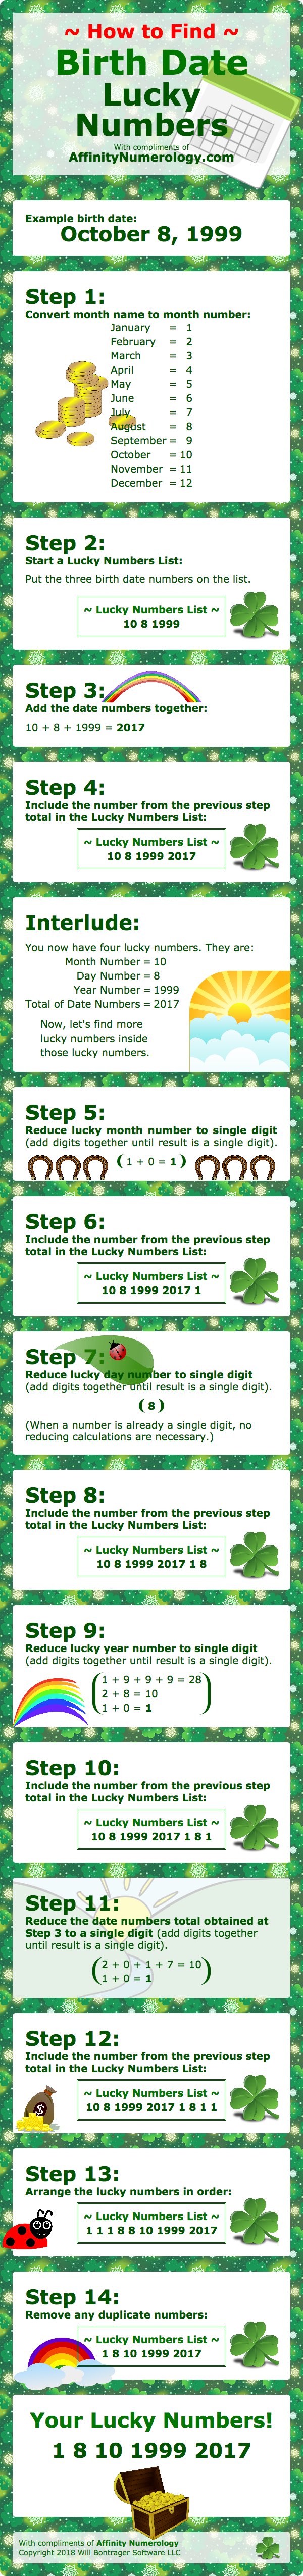 Infographic: How to find birth date lucky numbers